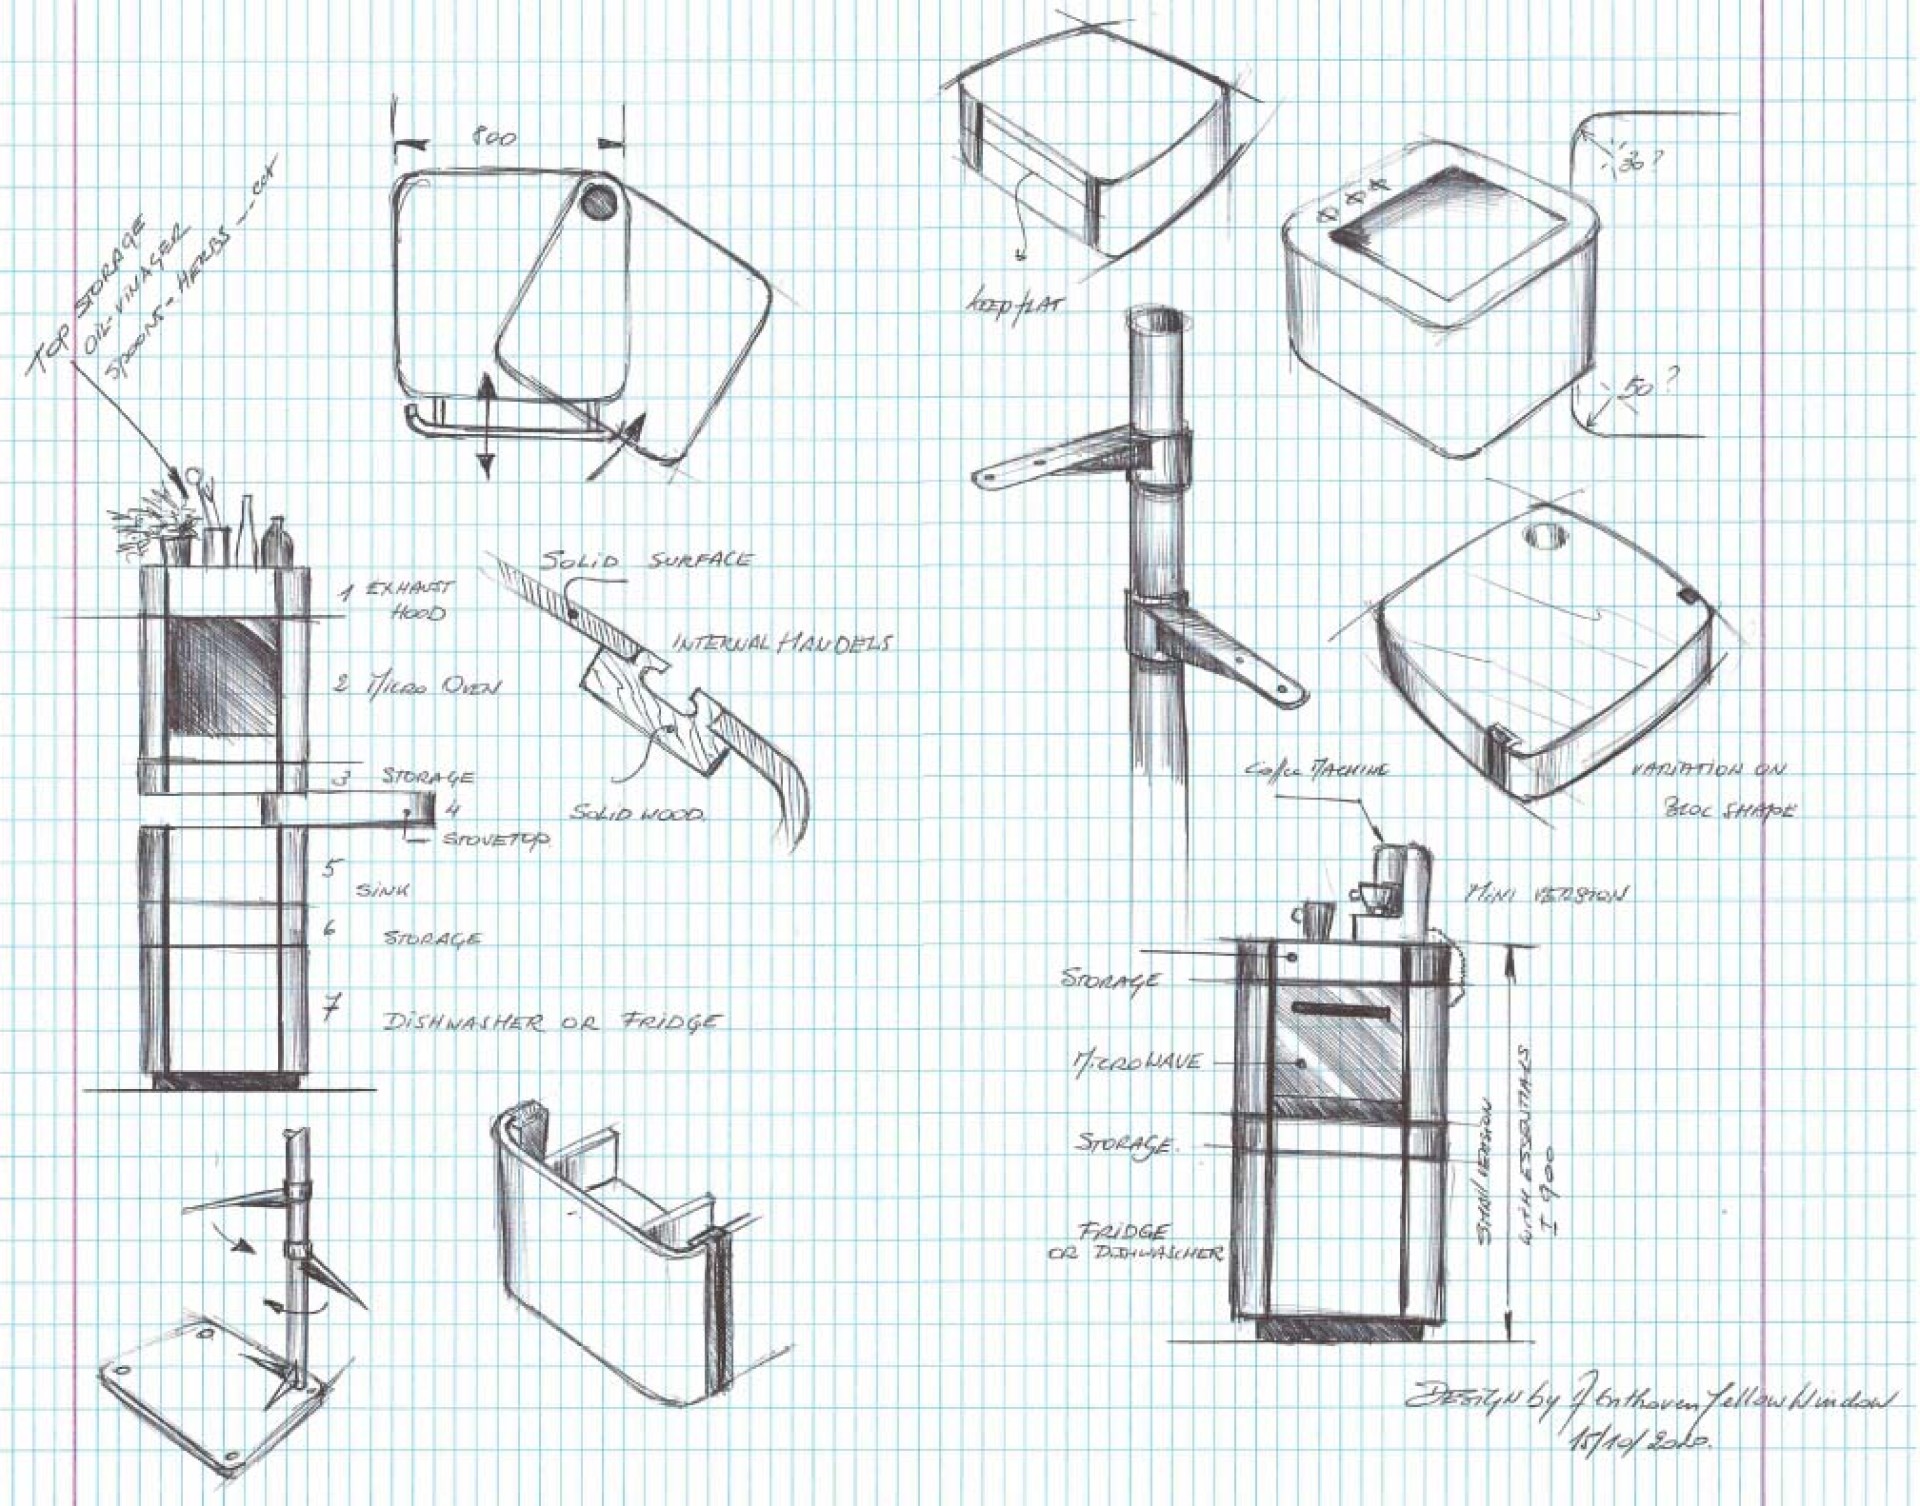 Sketches of the Benetorre, made by Axel Enthoven